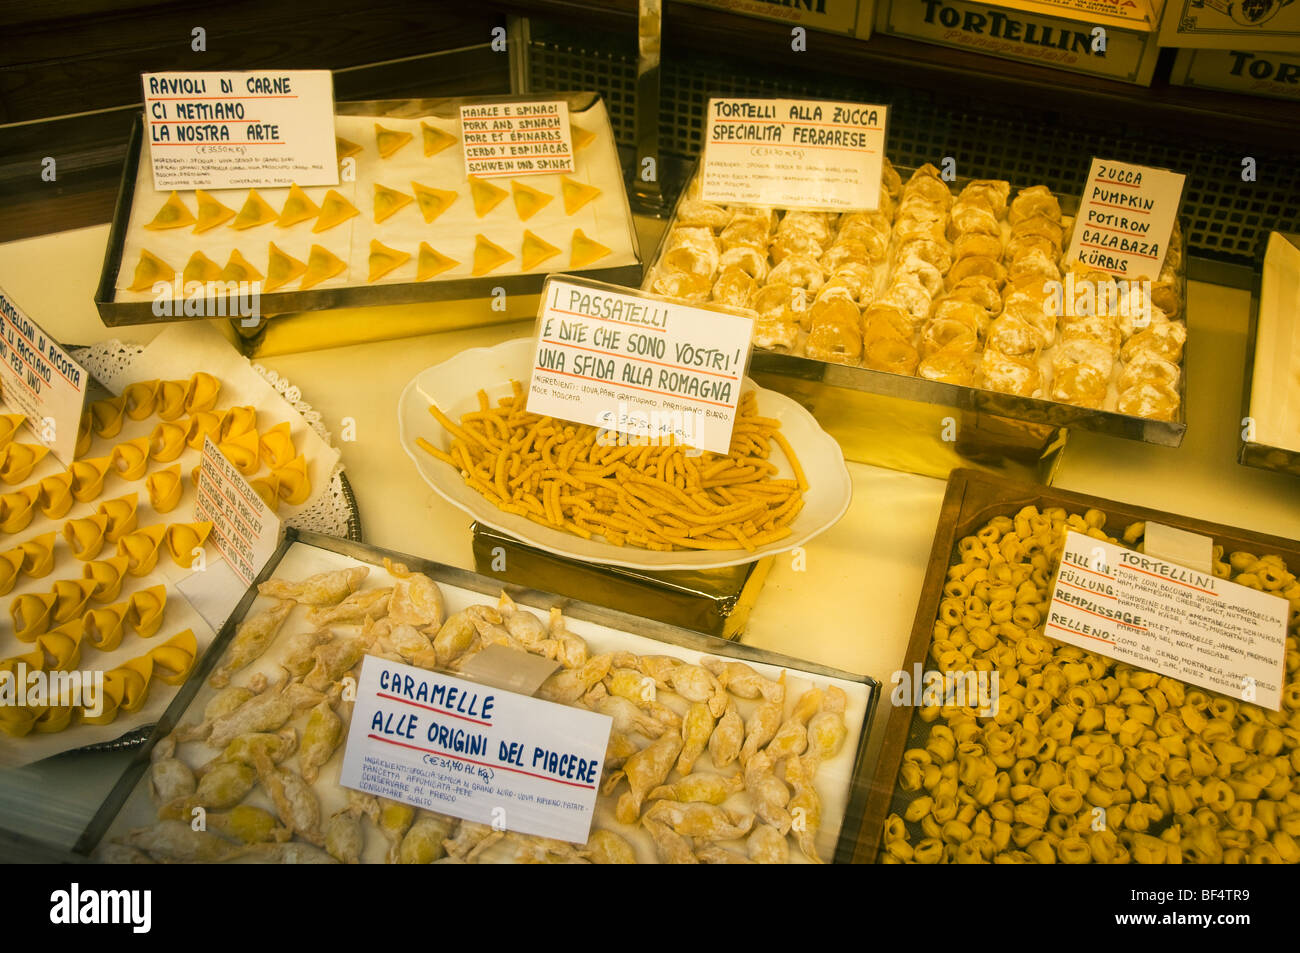 Fresh Tortellini and other pasta in market, Bologna, Italy Stock Photo